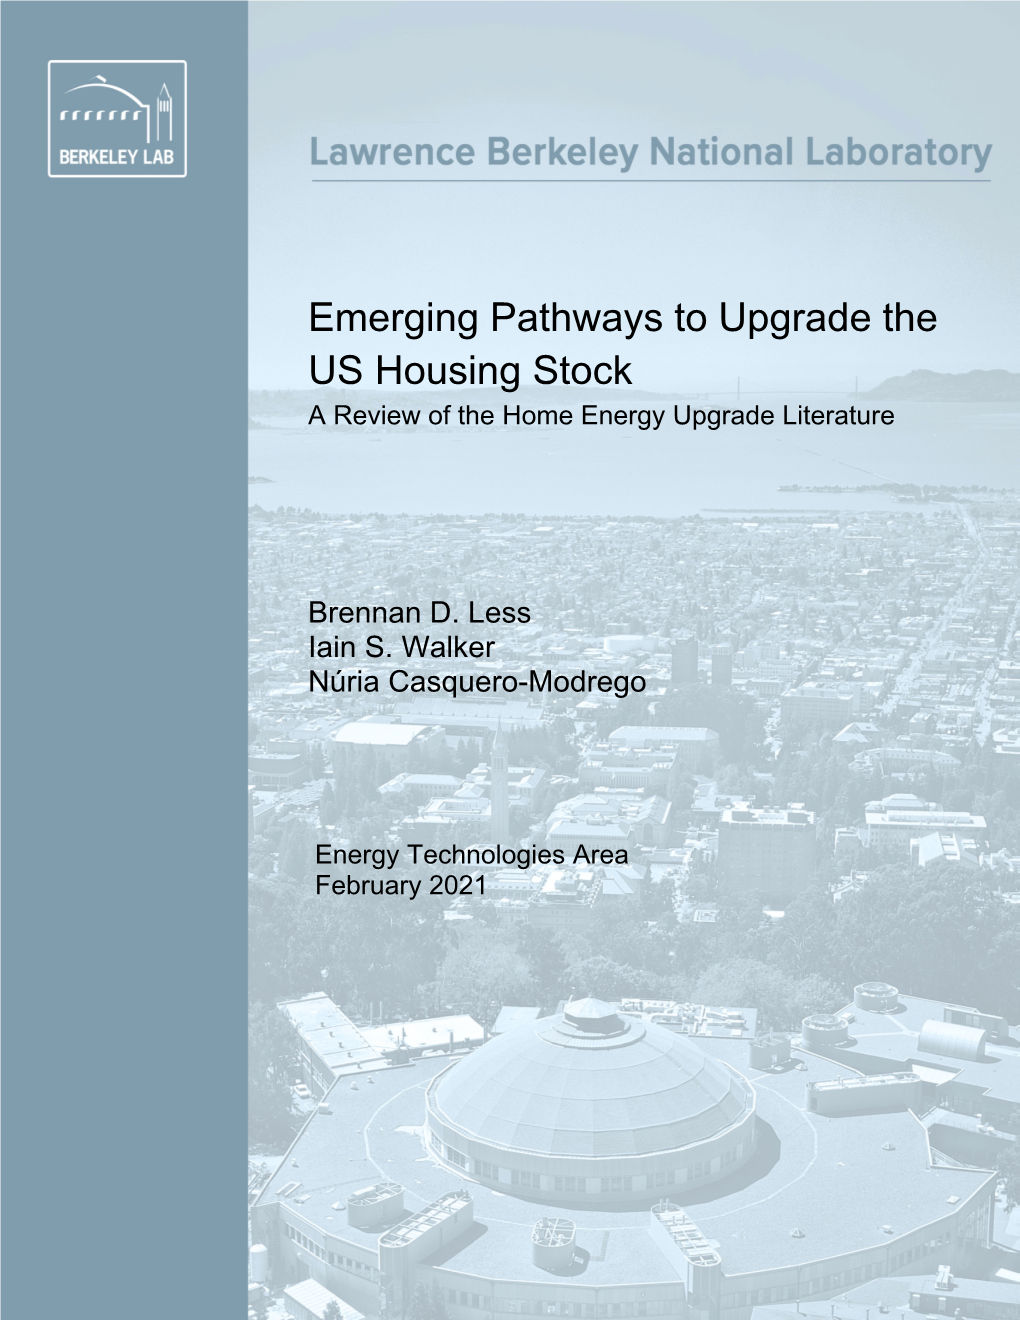 Emerging Pathways to Upgrade the US Housing Stock a Review of the Home Energy Upgrade Literature